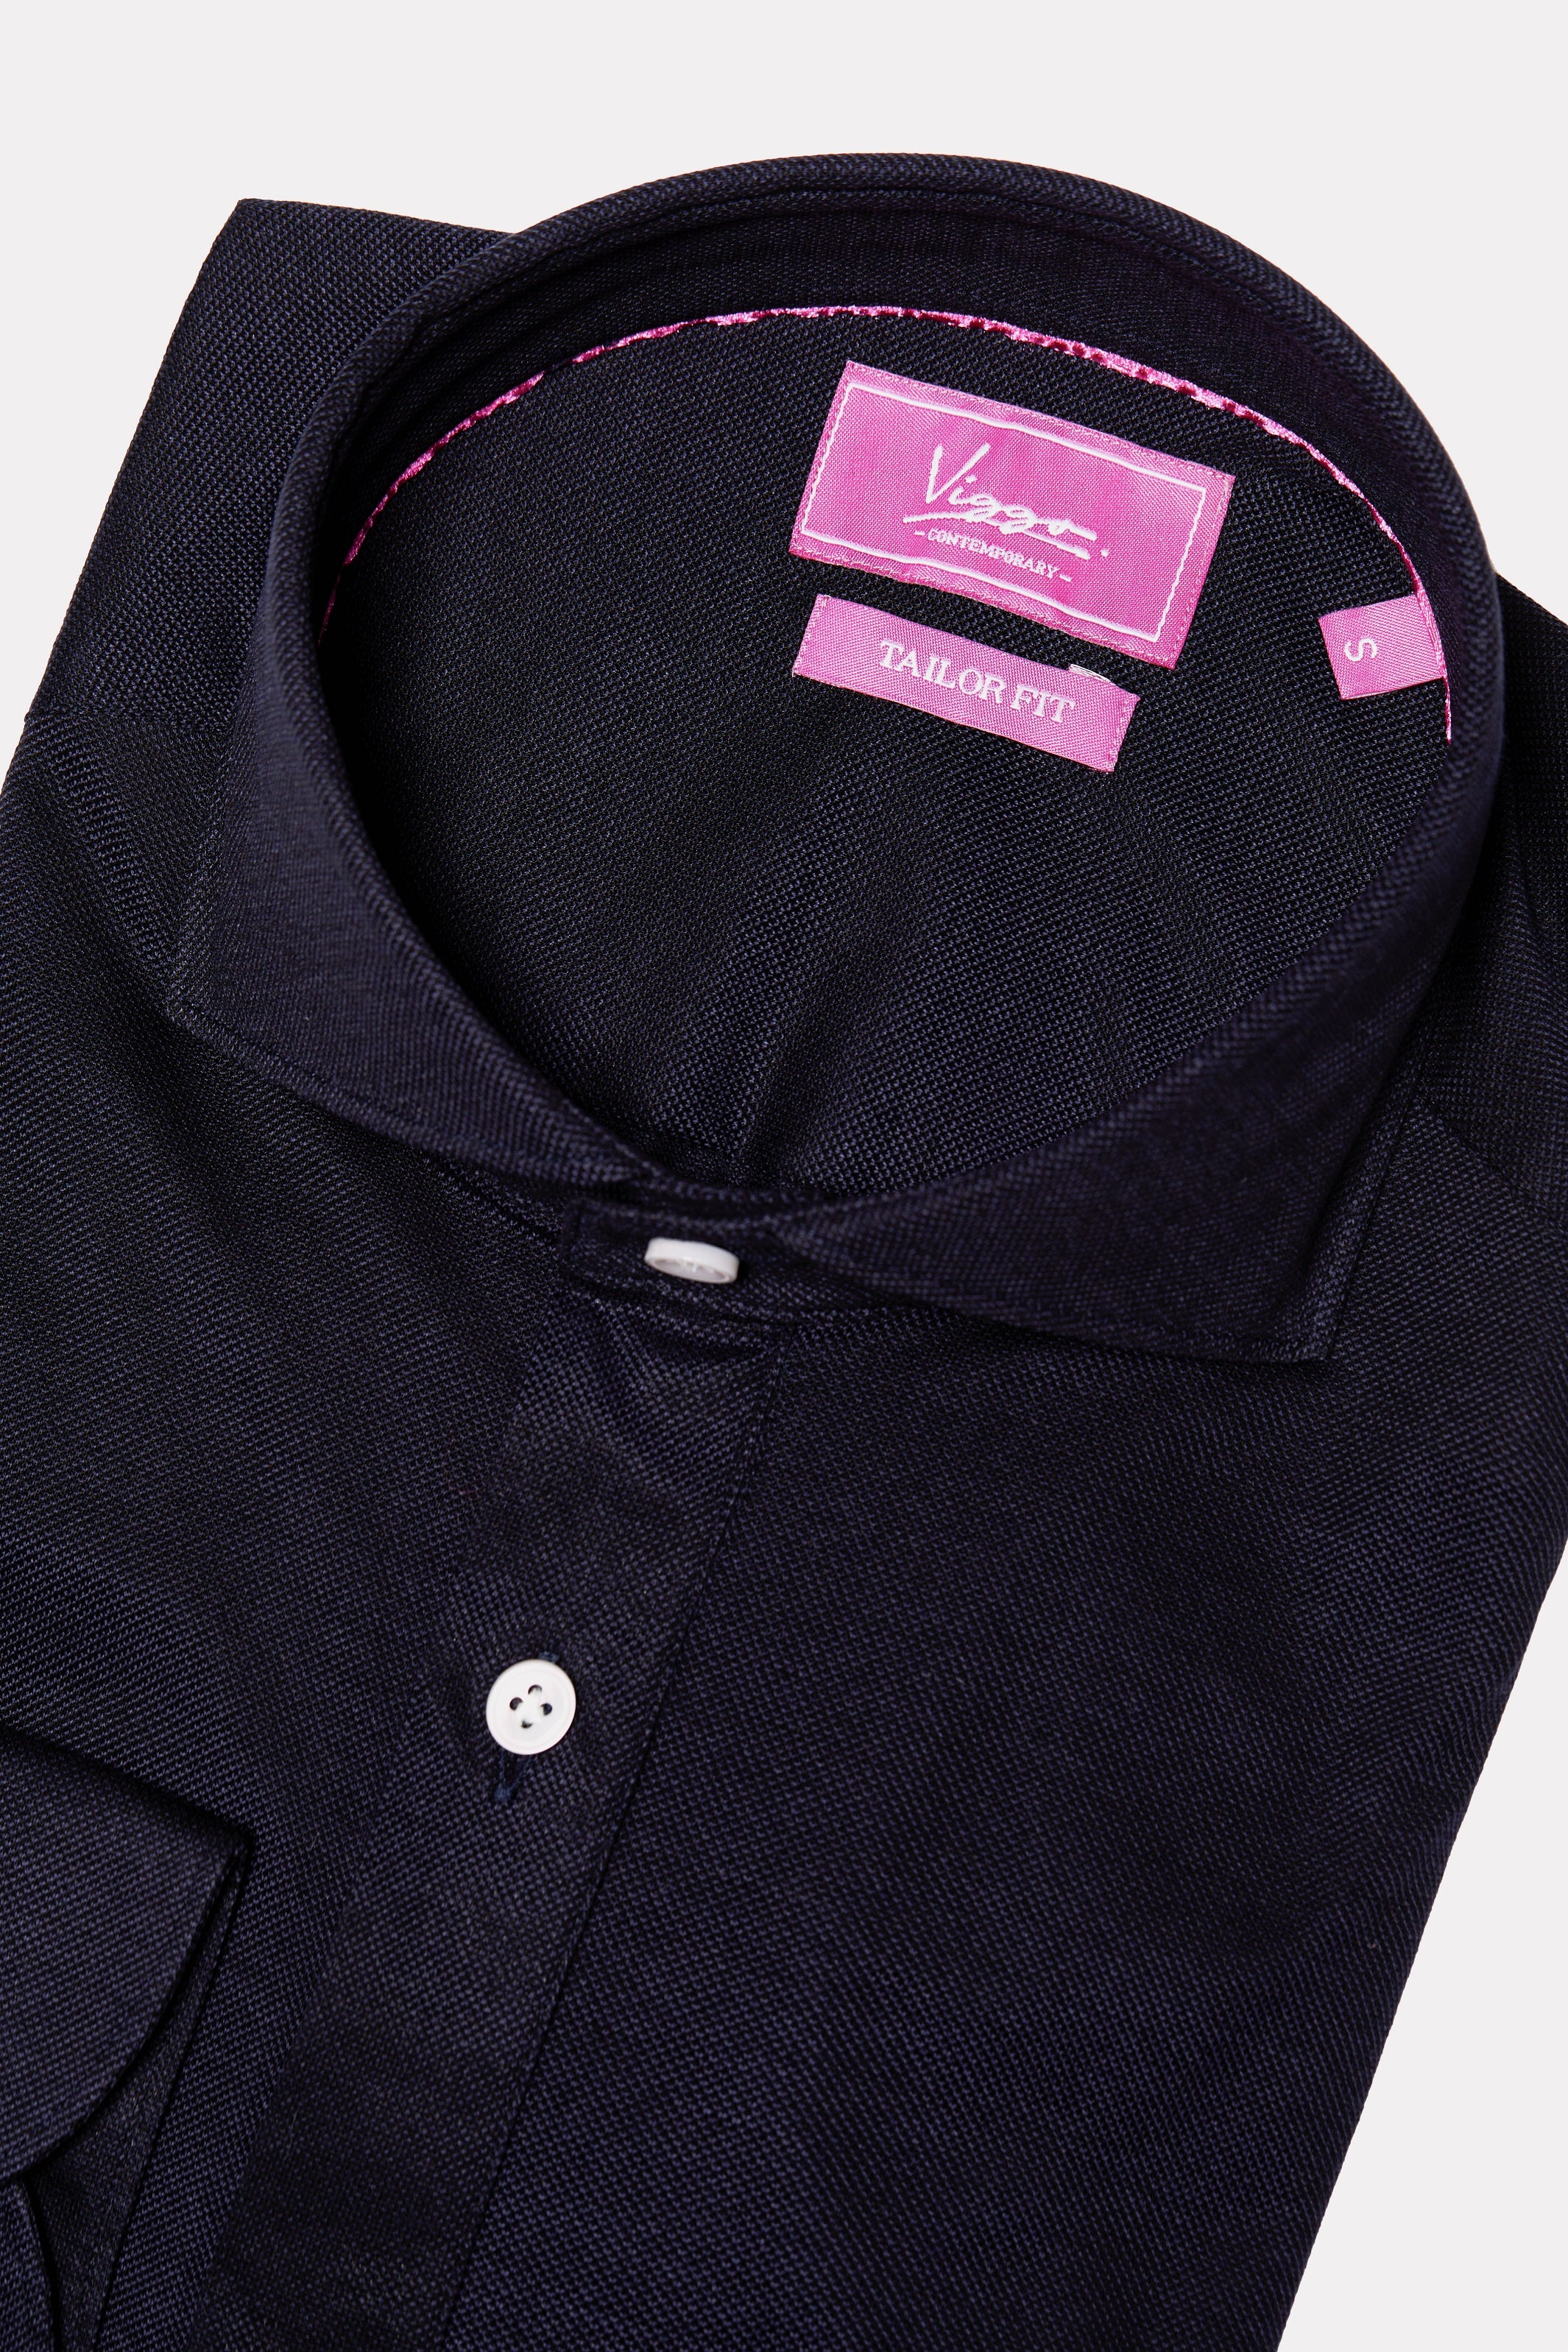 Black popover shirt with navy blue texture